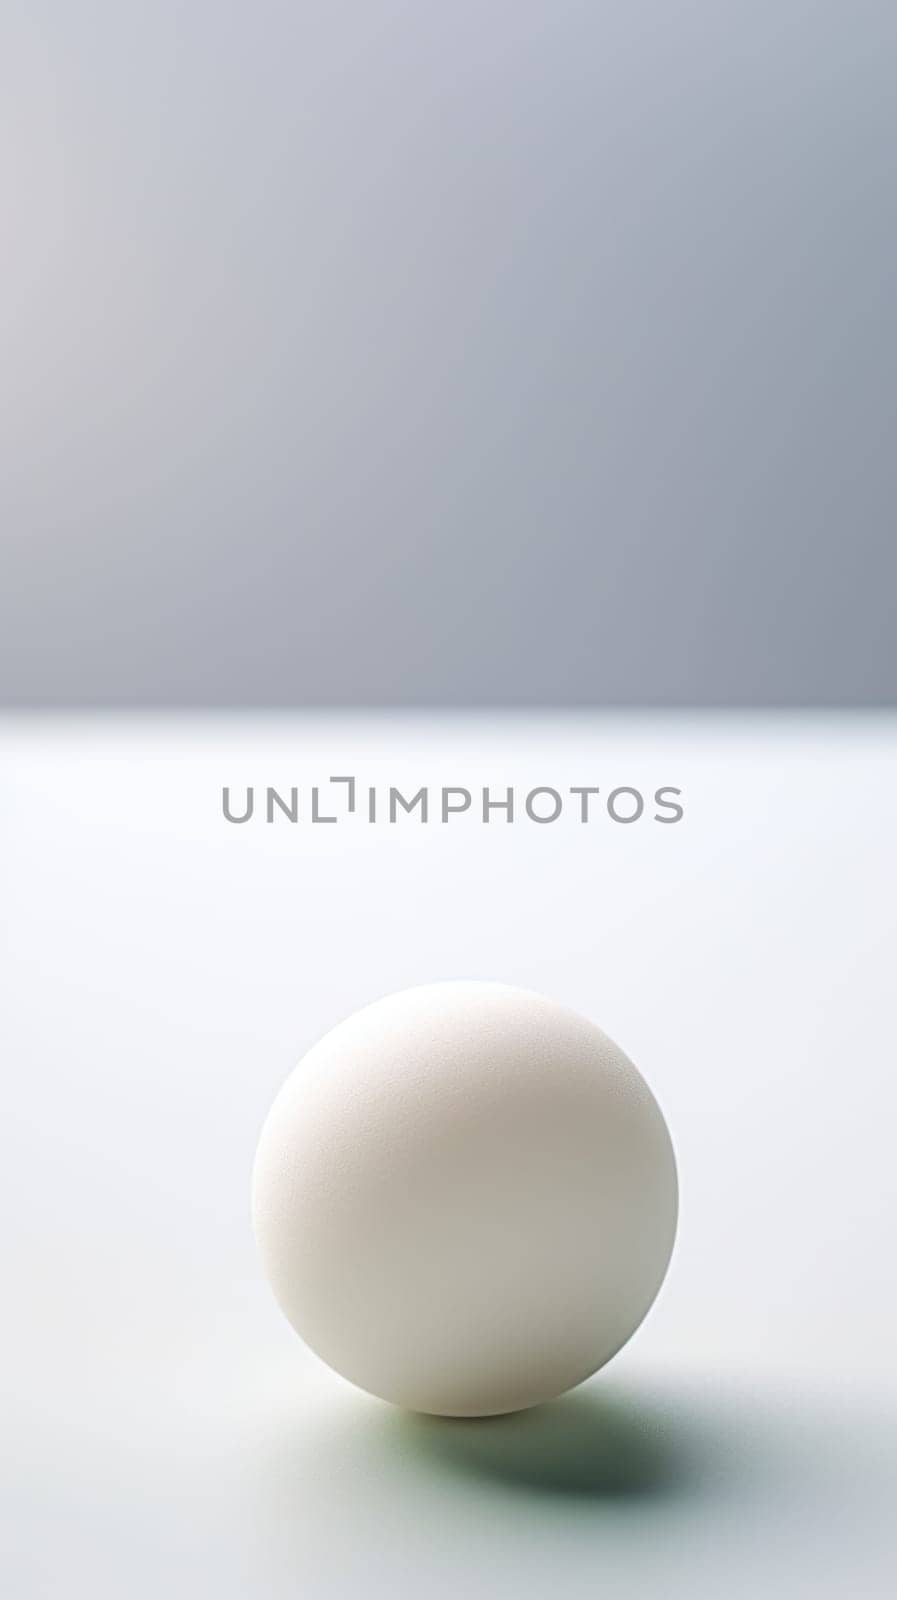 A ping pong ball sitting on a table with a white background, AI by starush